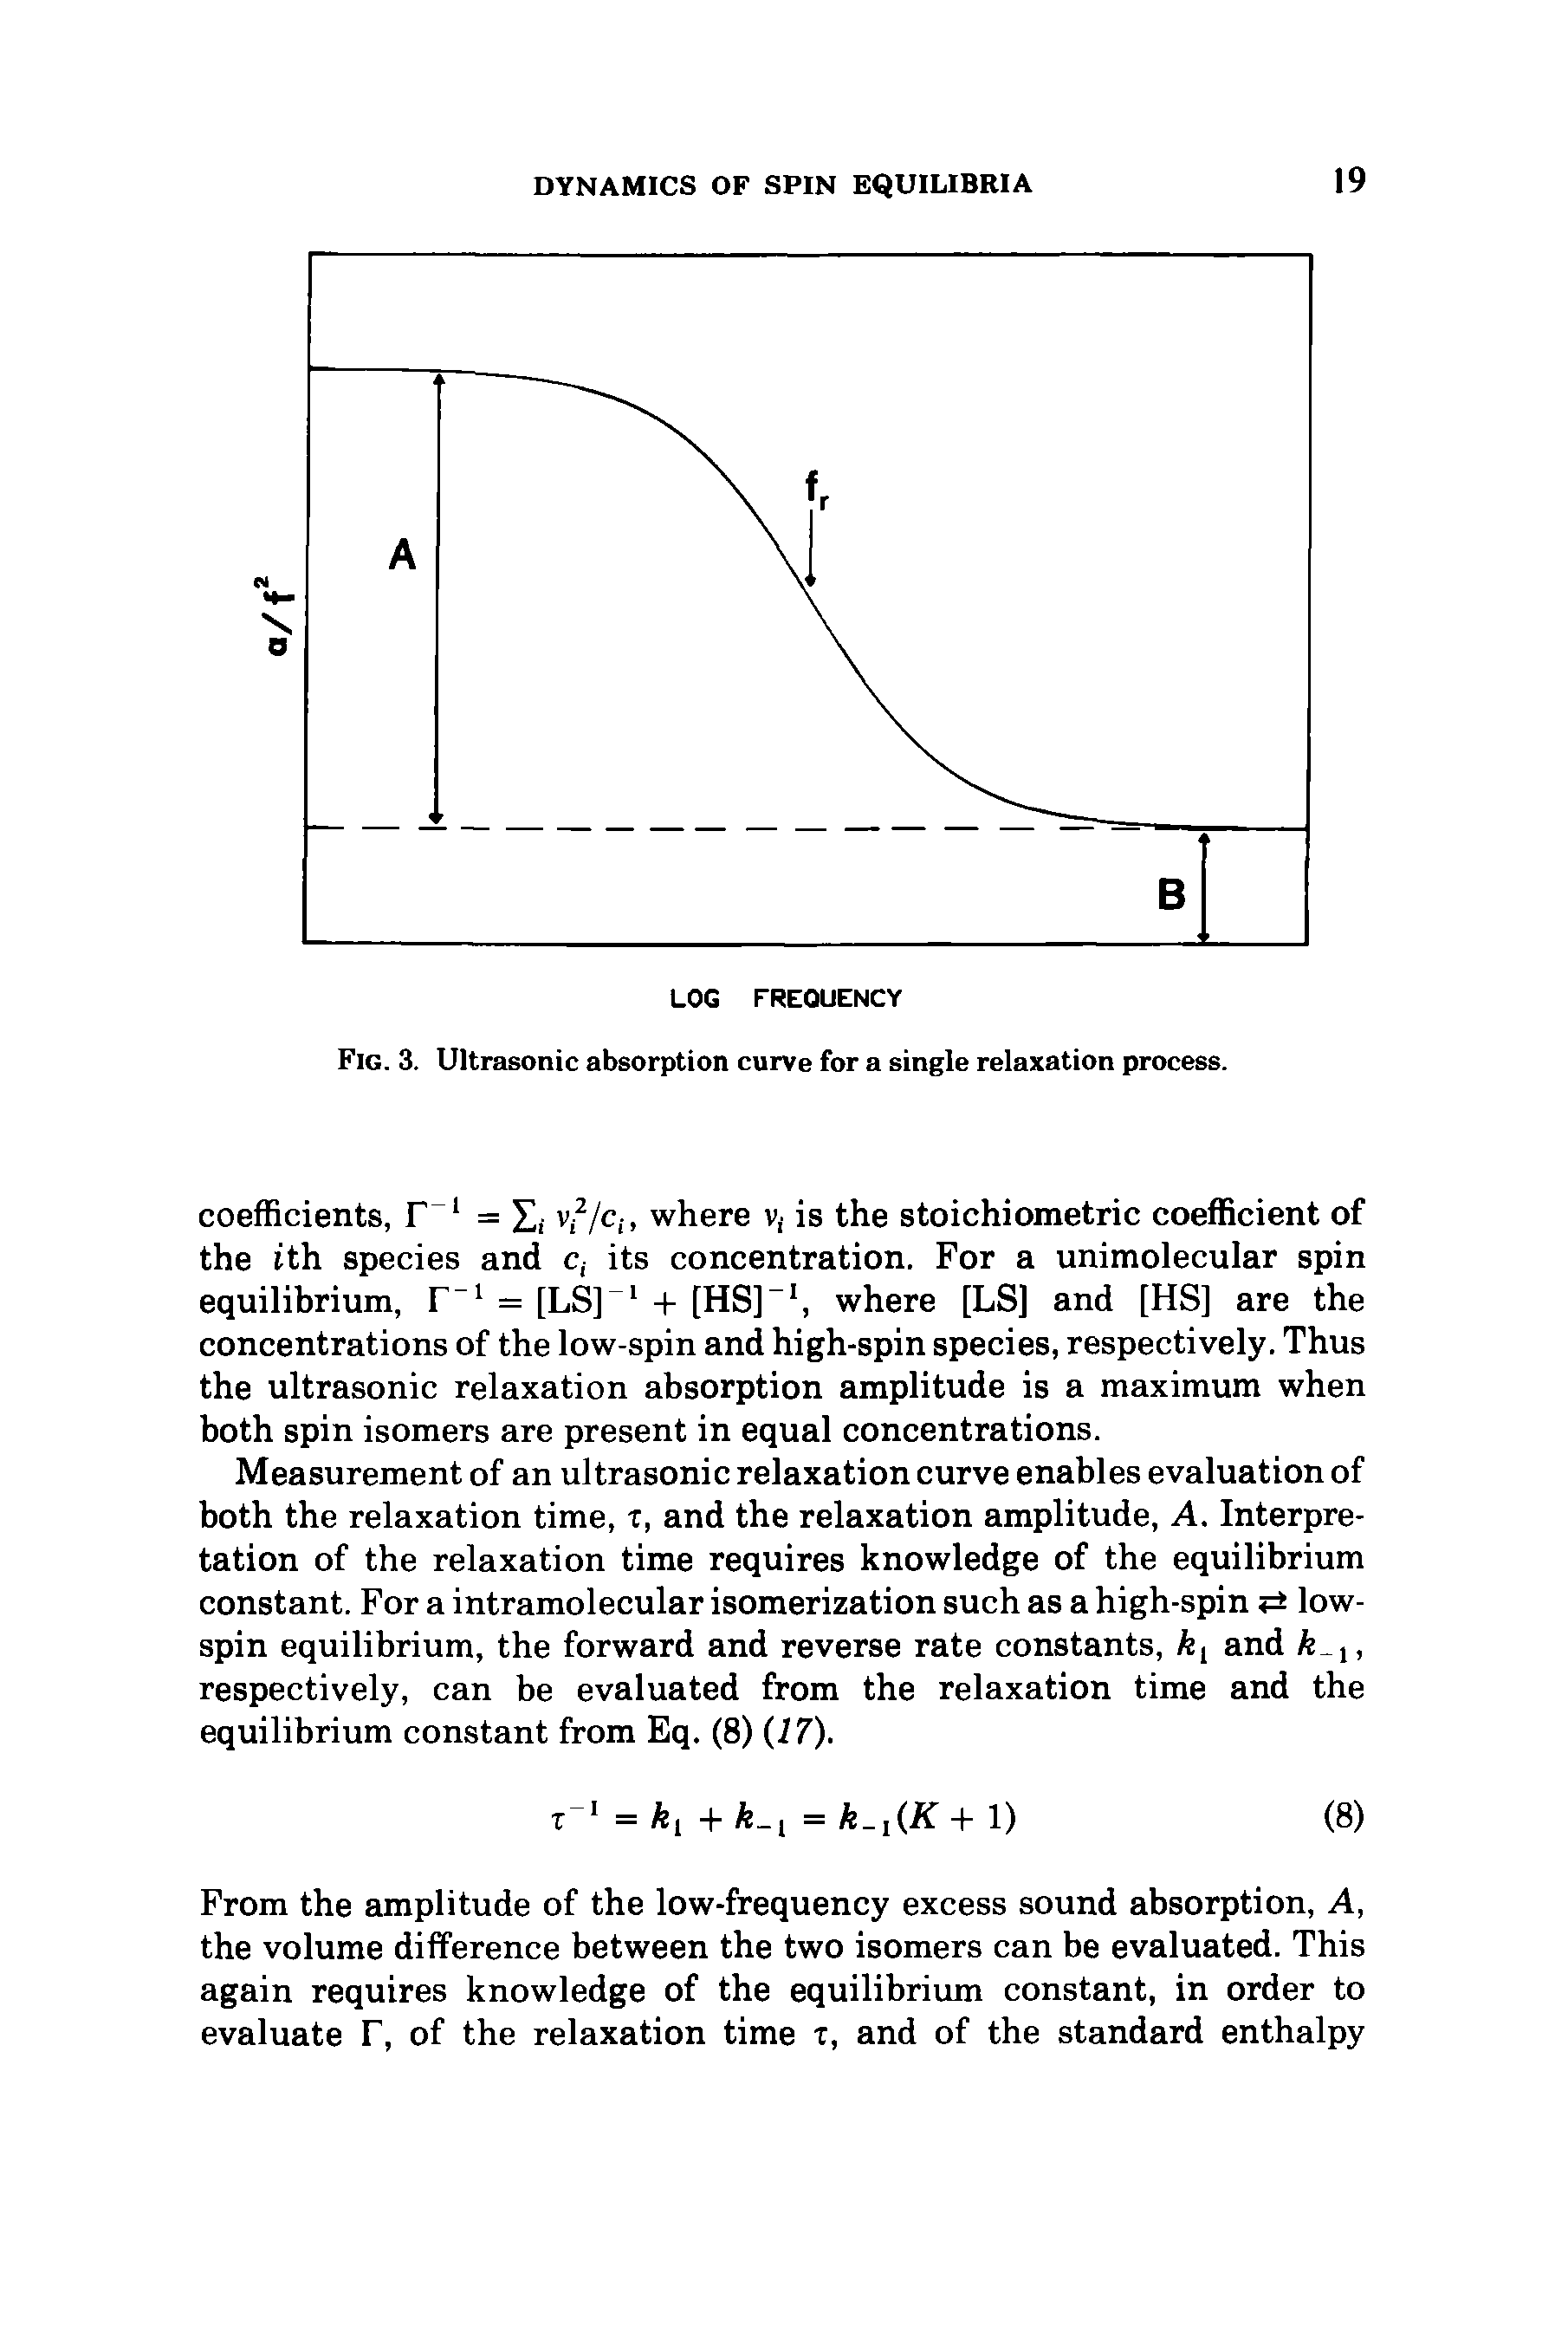 Fig. 3. Ultrasonic absorption curve for a single relaxation process.